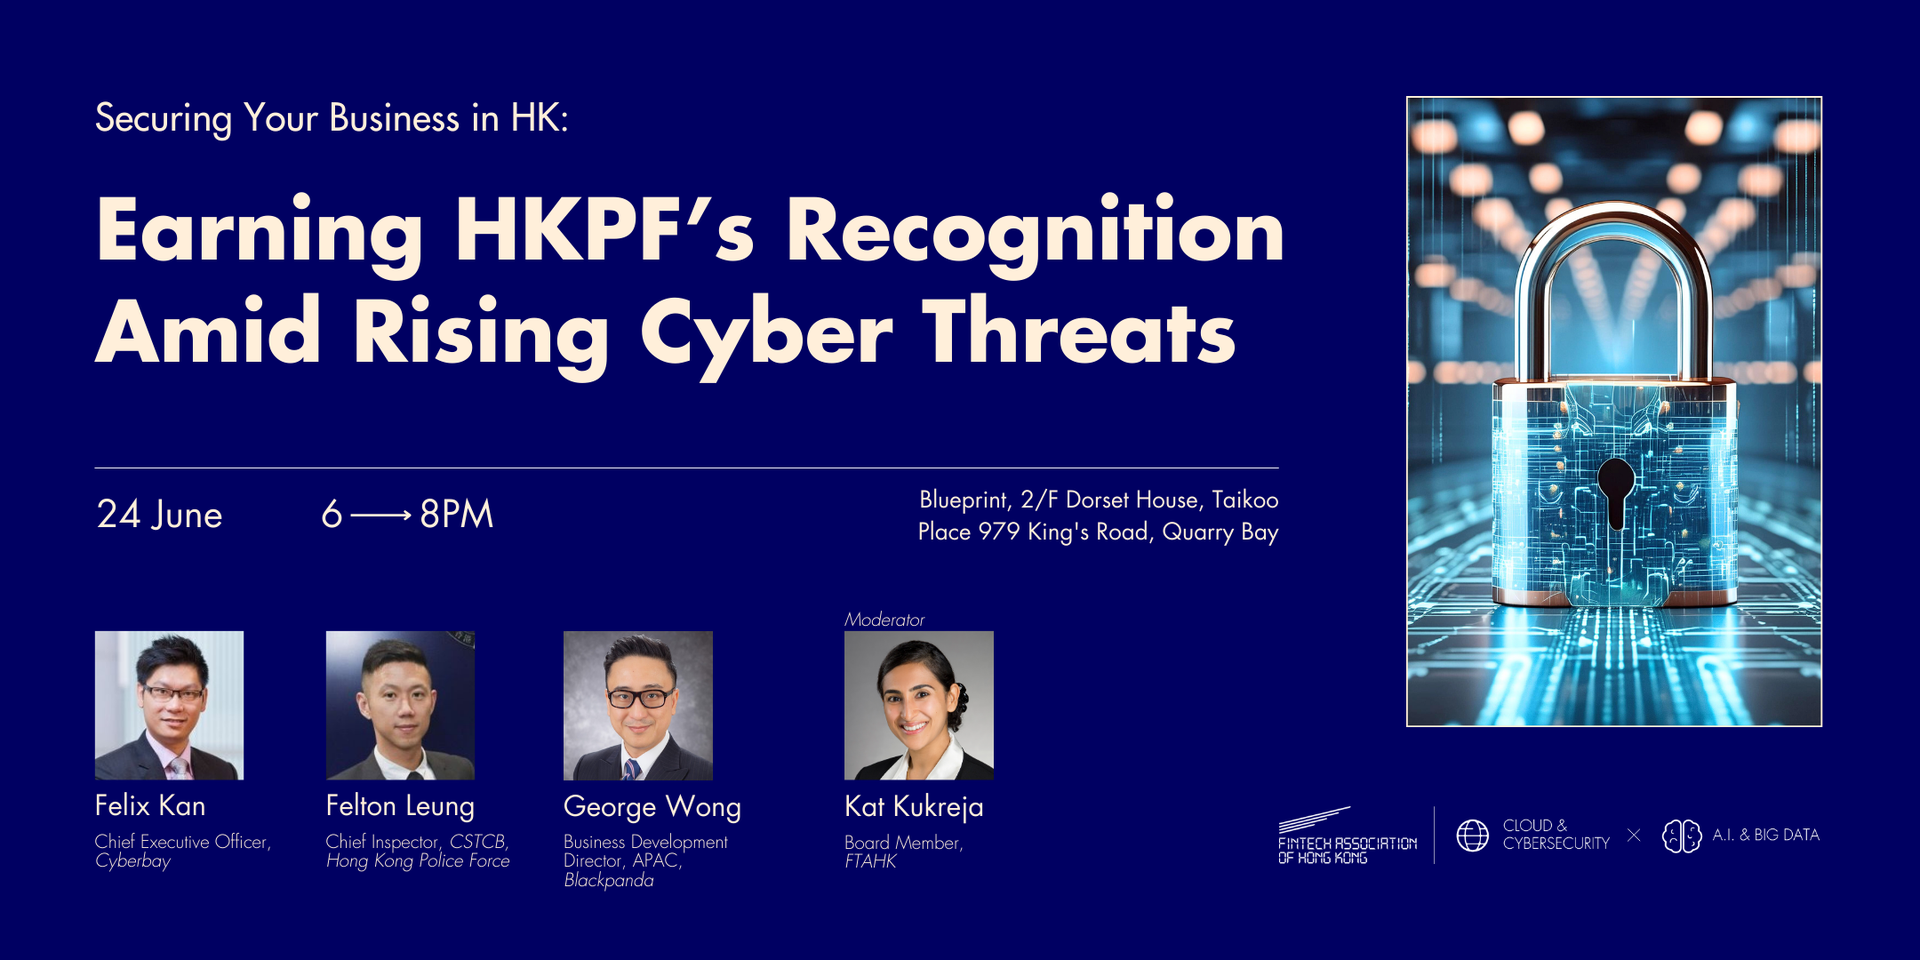 thumbnails Cloud & Cybersecurity x A.I. & Big Data: Earning HKPF's Recognition Amid Rising Cyber Threats